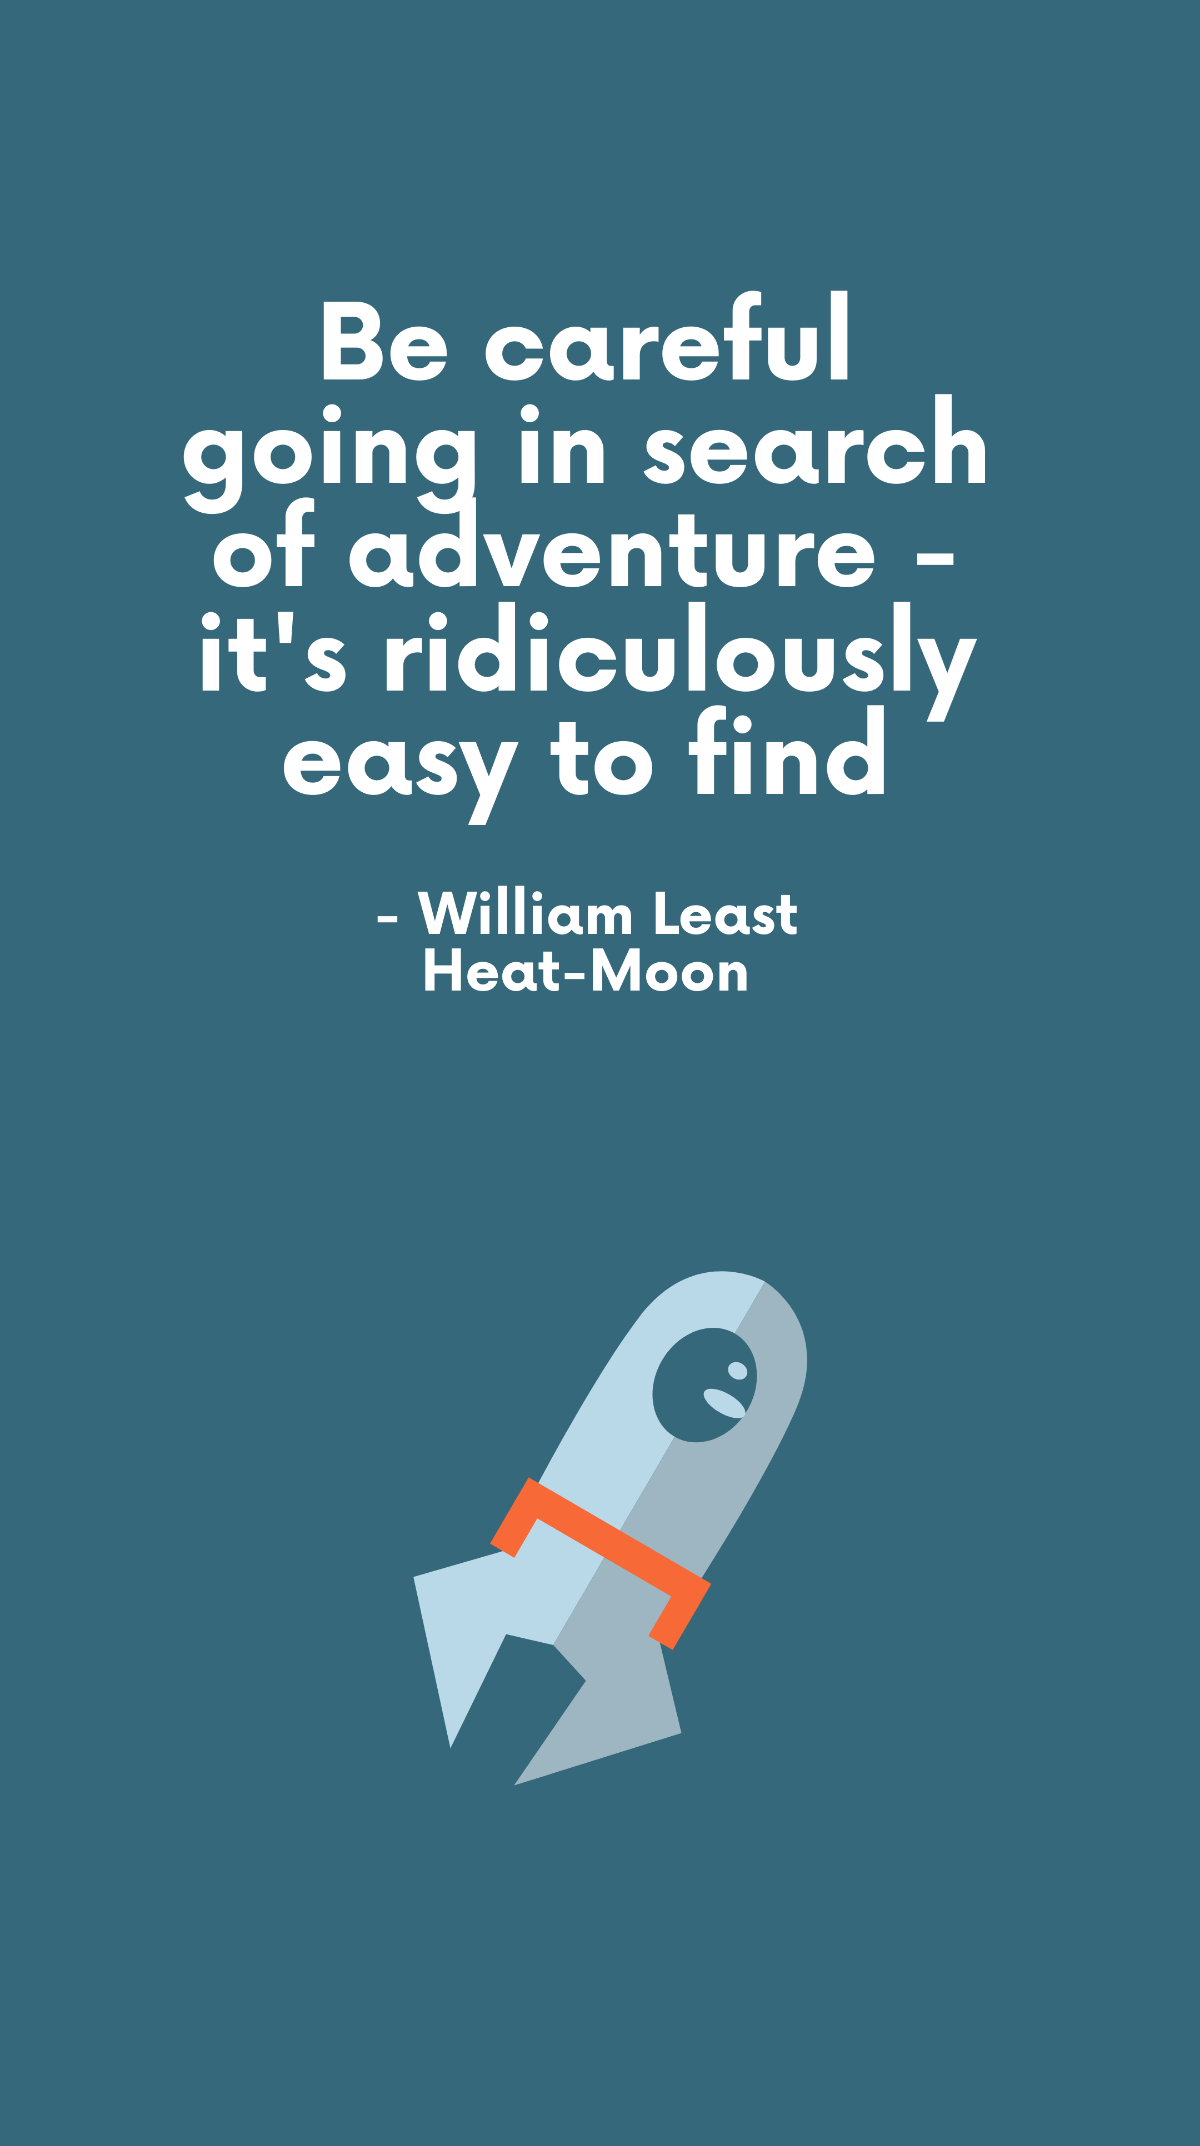 William Least Heat-Moon - Be careful going in search of adventure - it's ridiculously easy to find